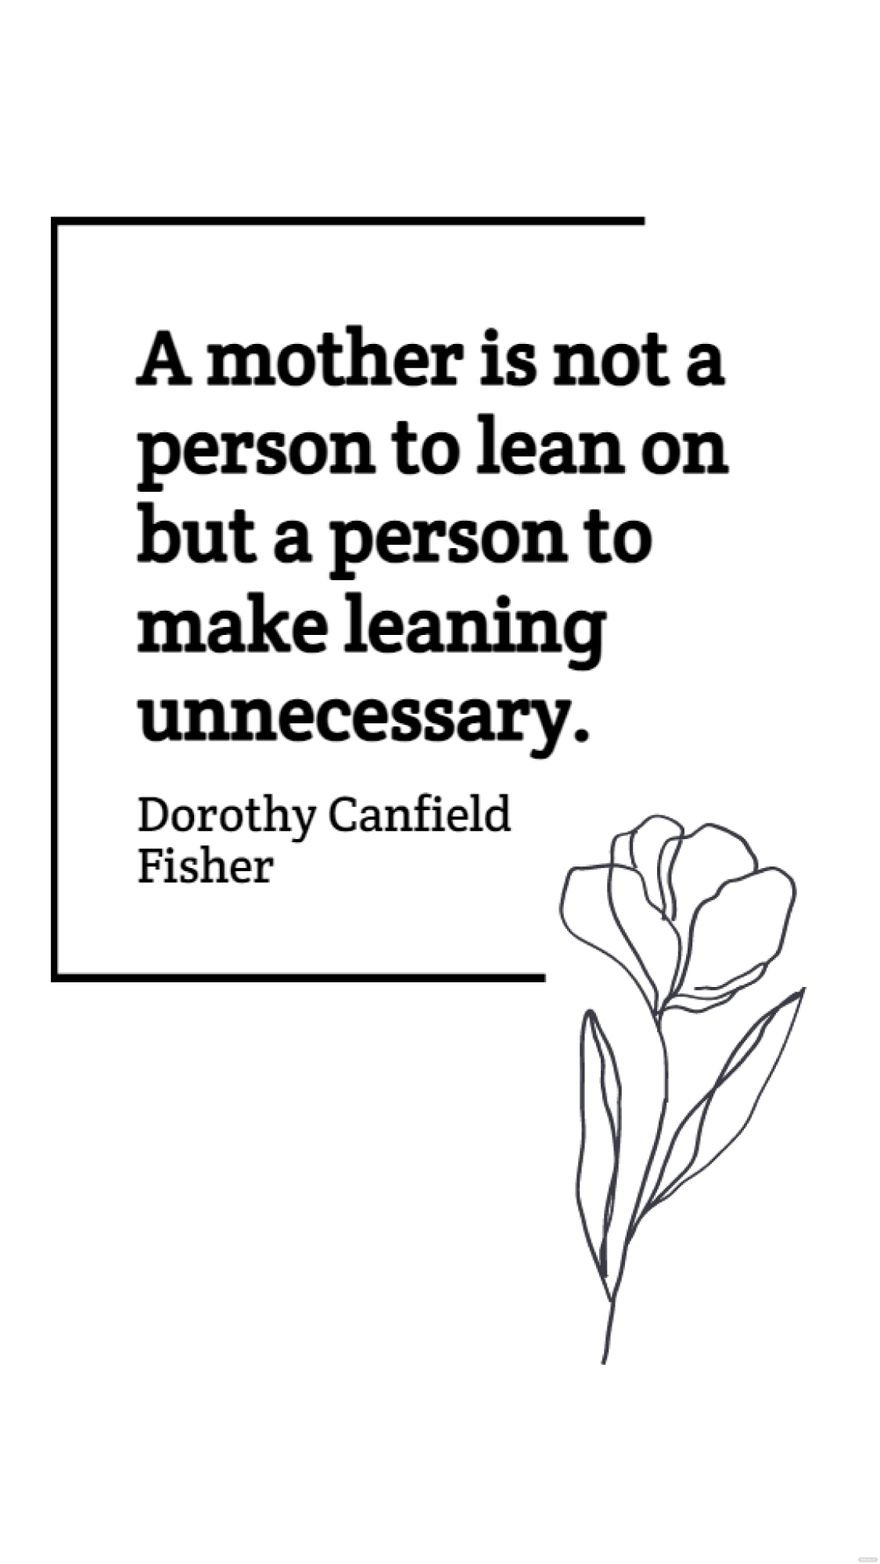 Dorothy Canfield Fisher - A mother is not a person to lean on but a person to make leaning unnecessary.